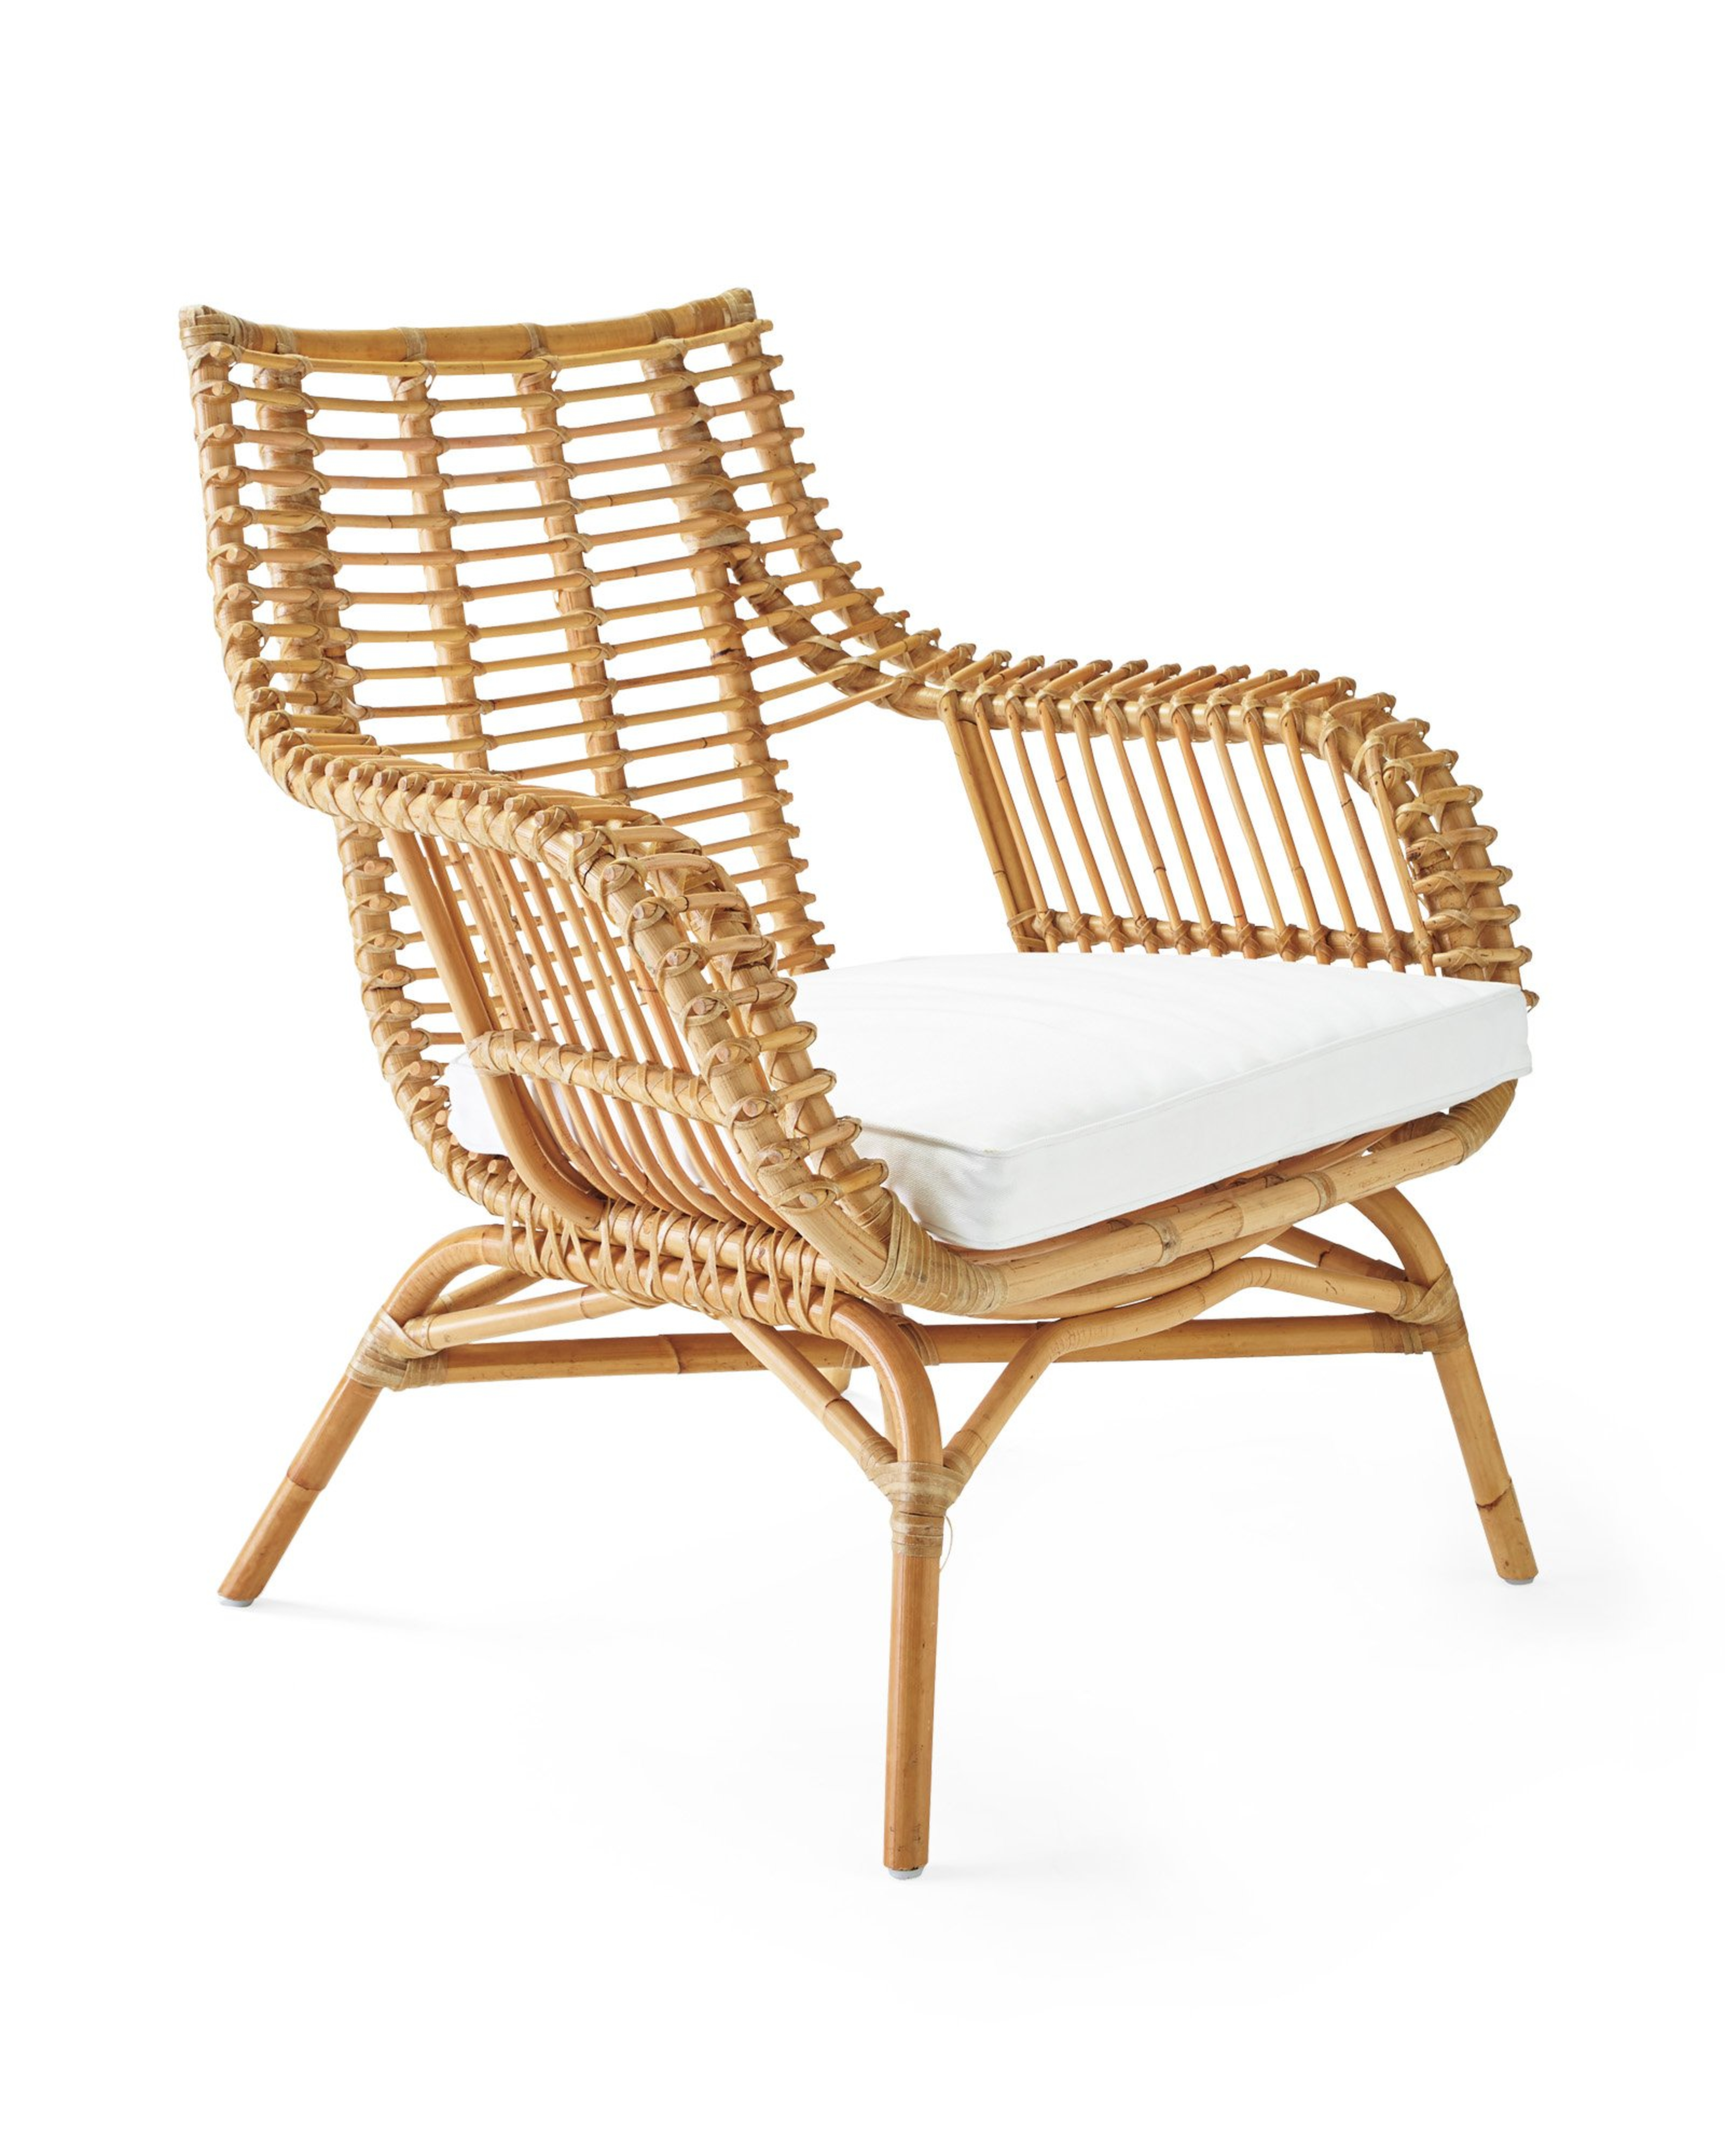 Venice Rattan Chair Cushion - Serena and Lily